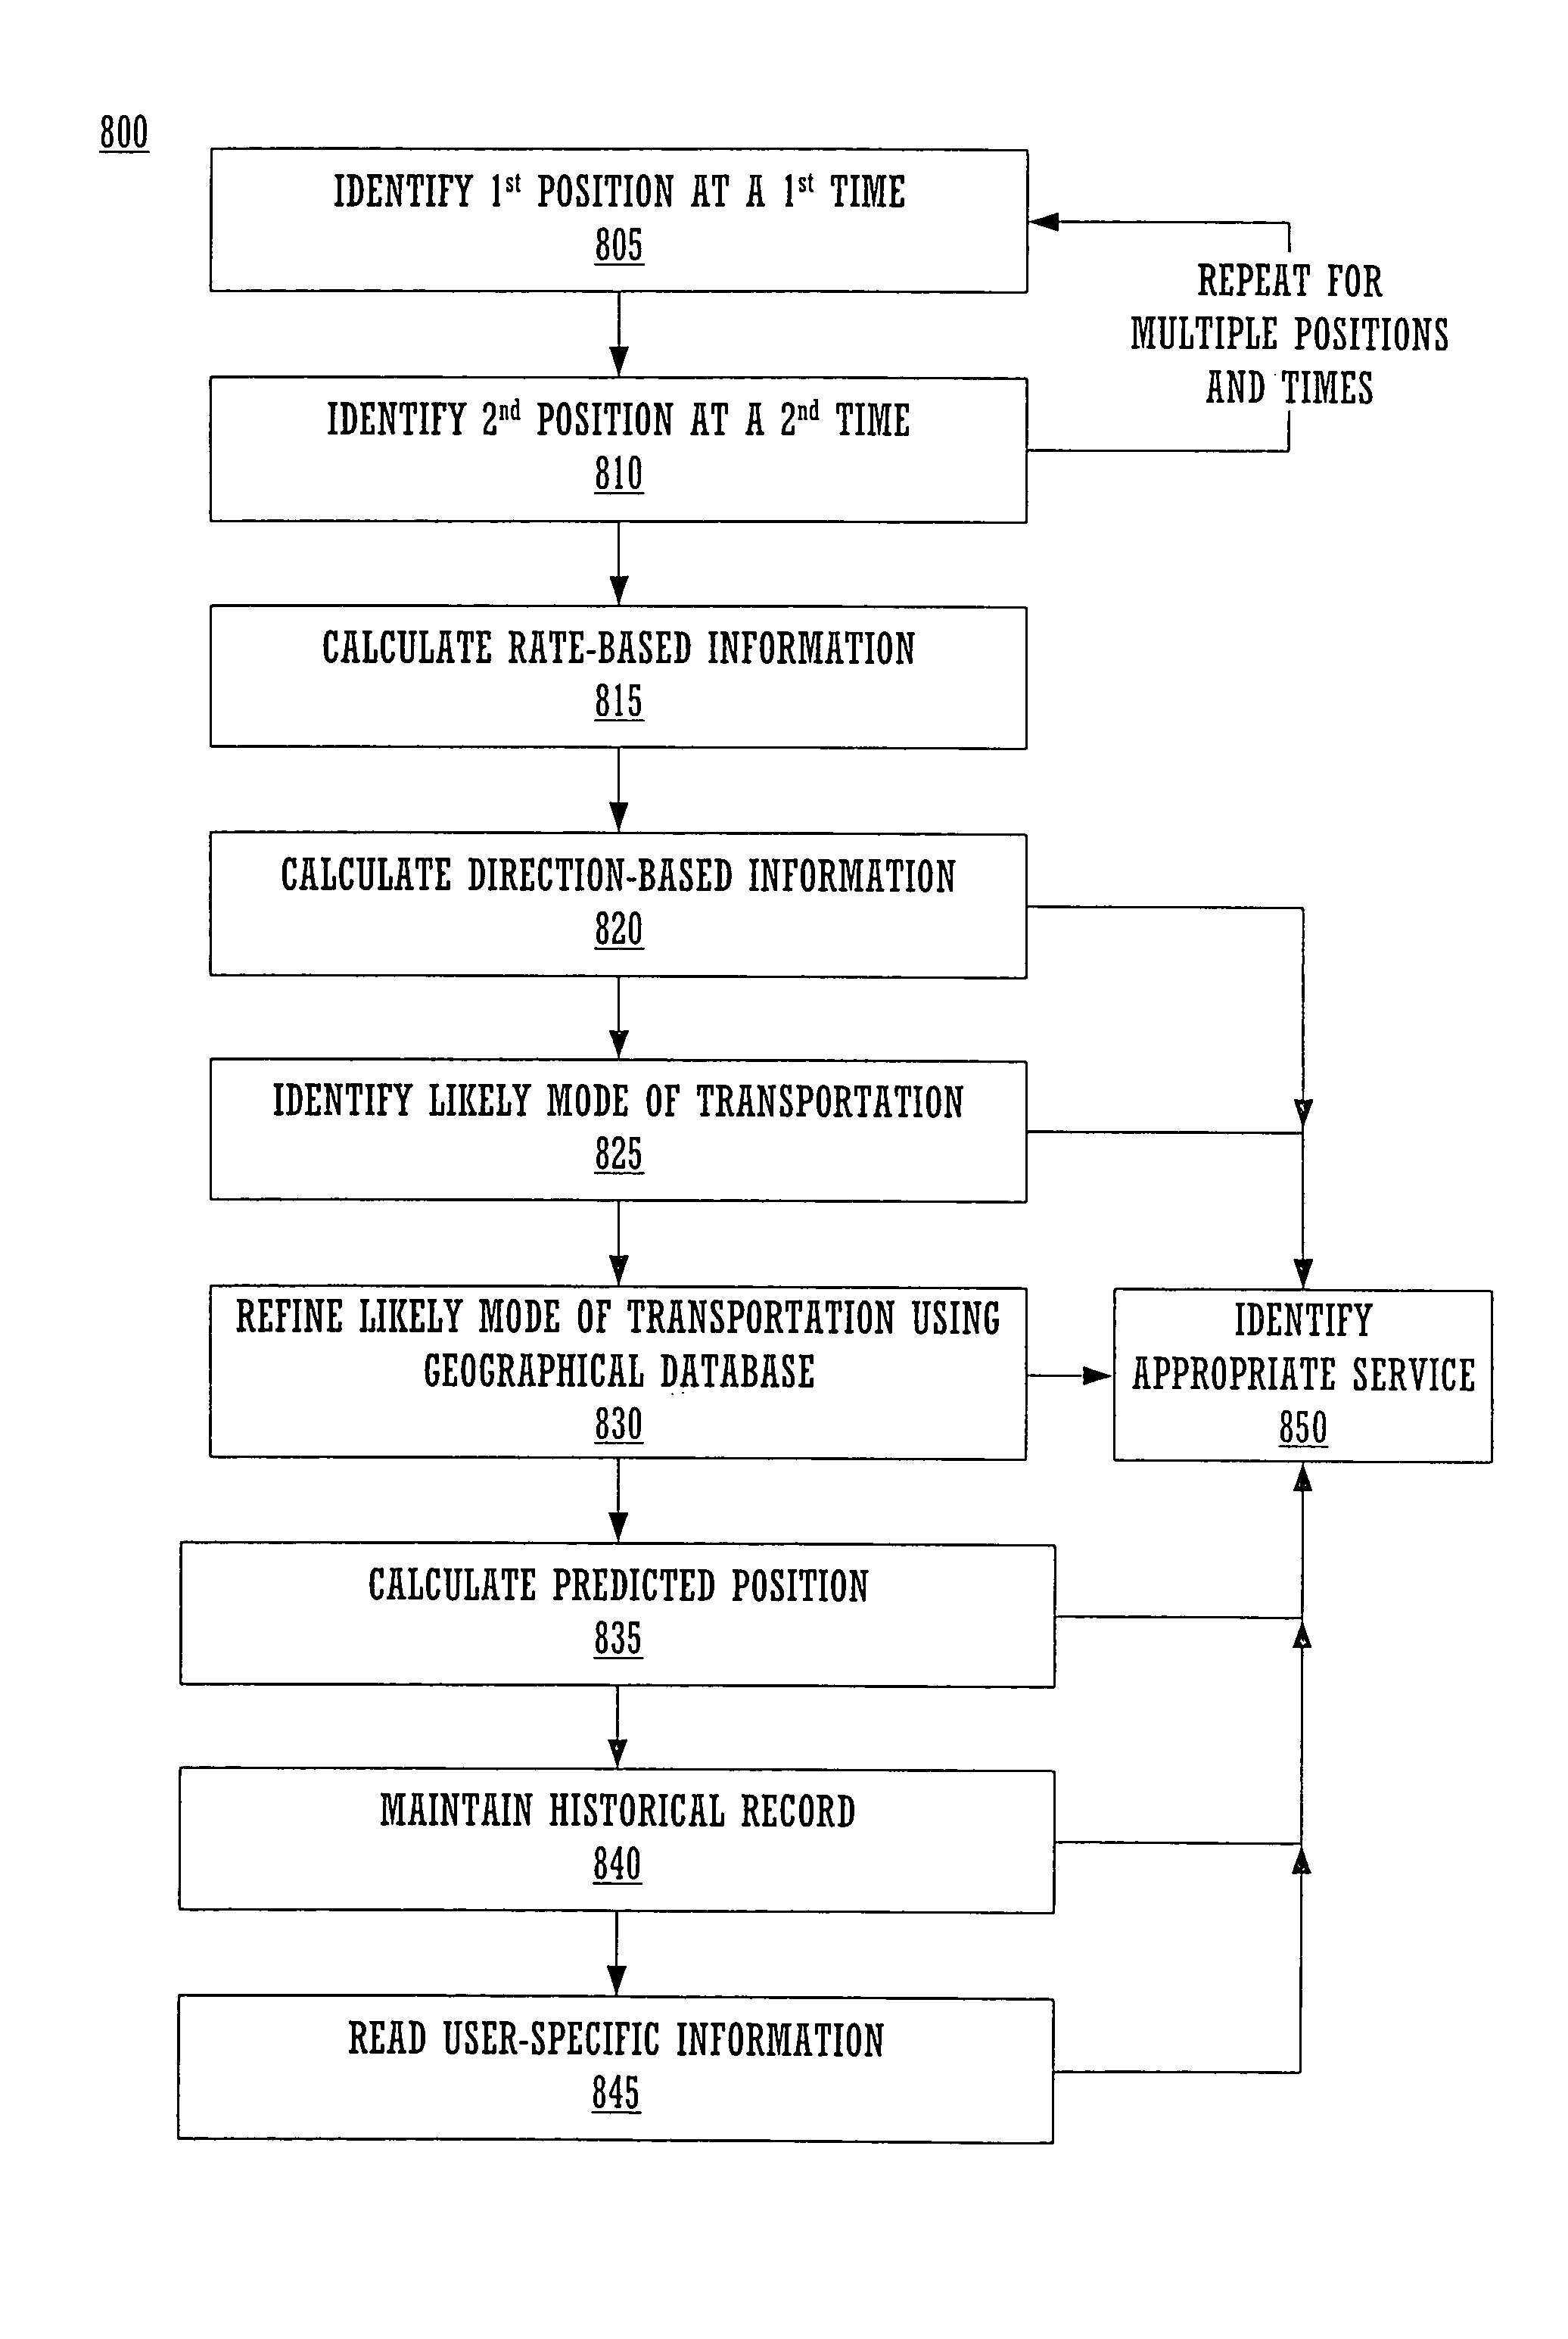 Providing content based on user-specific information from a wireless device